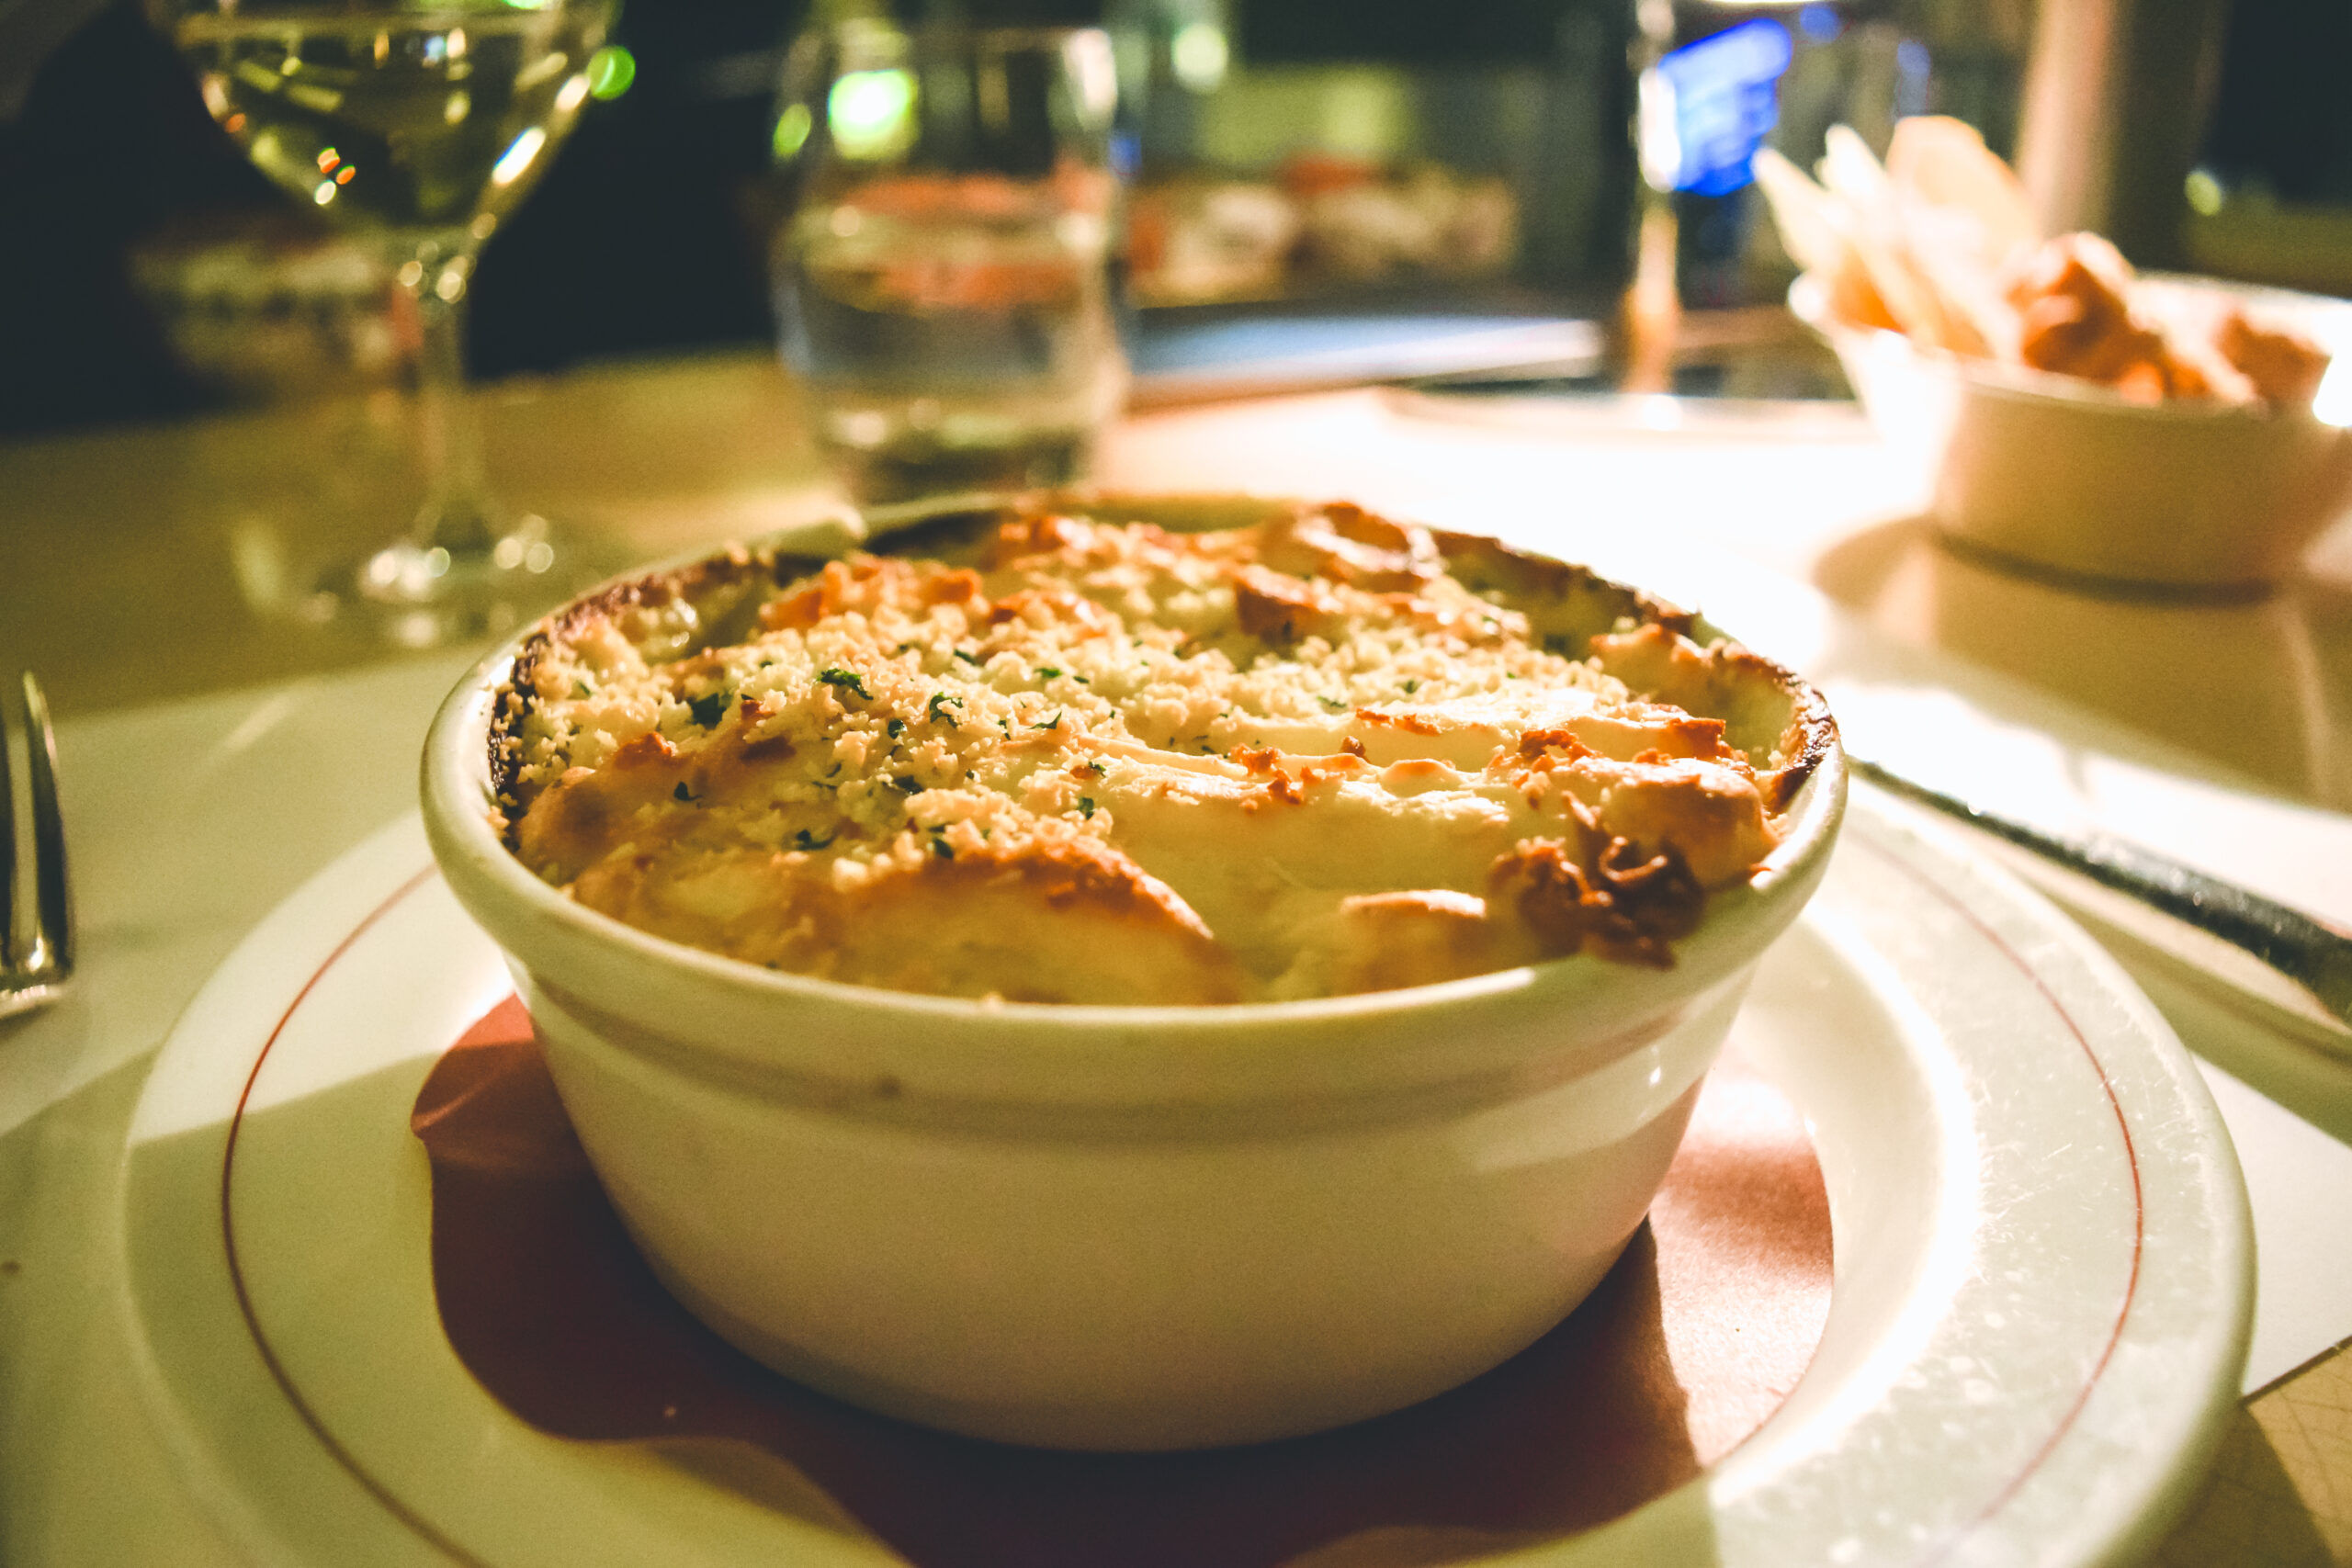 J Sheekey Fish pie Travel guide to london uk blog what to do what to see where to go 3 days-77